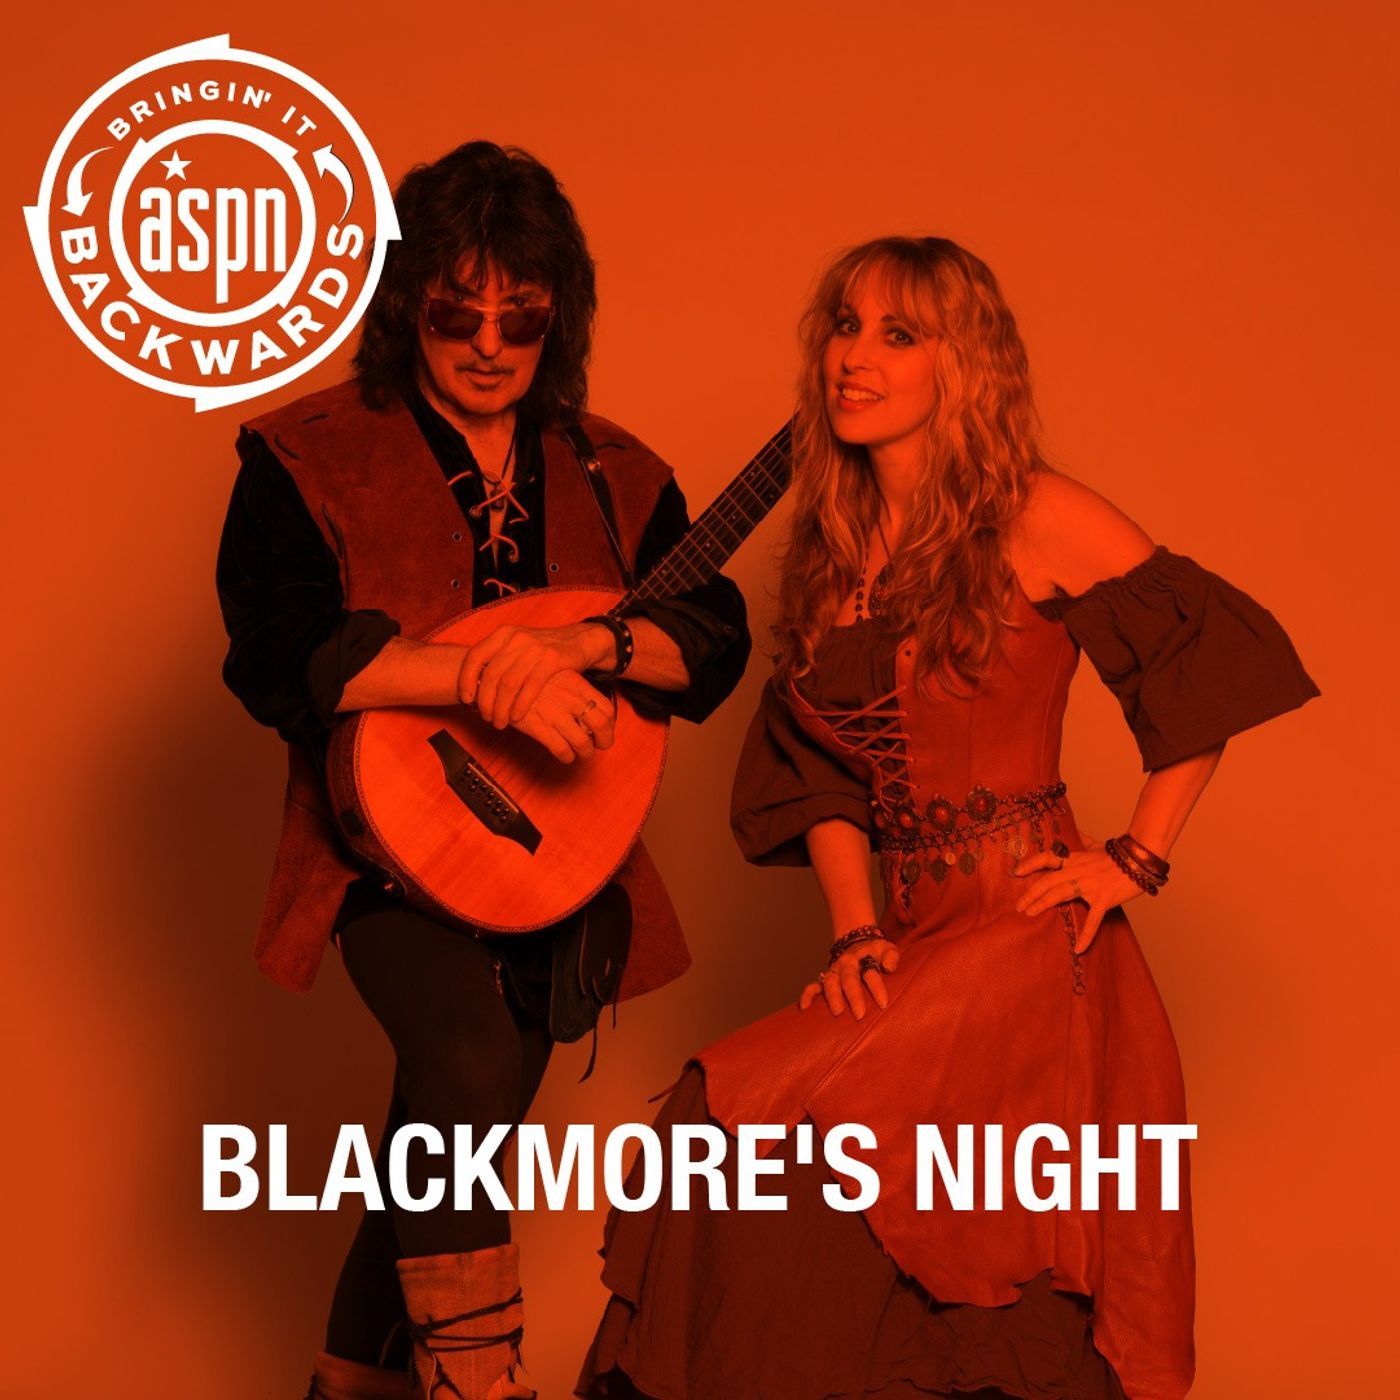 Interview with Blackmore's Night Image